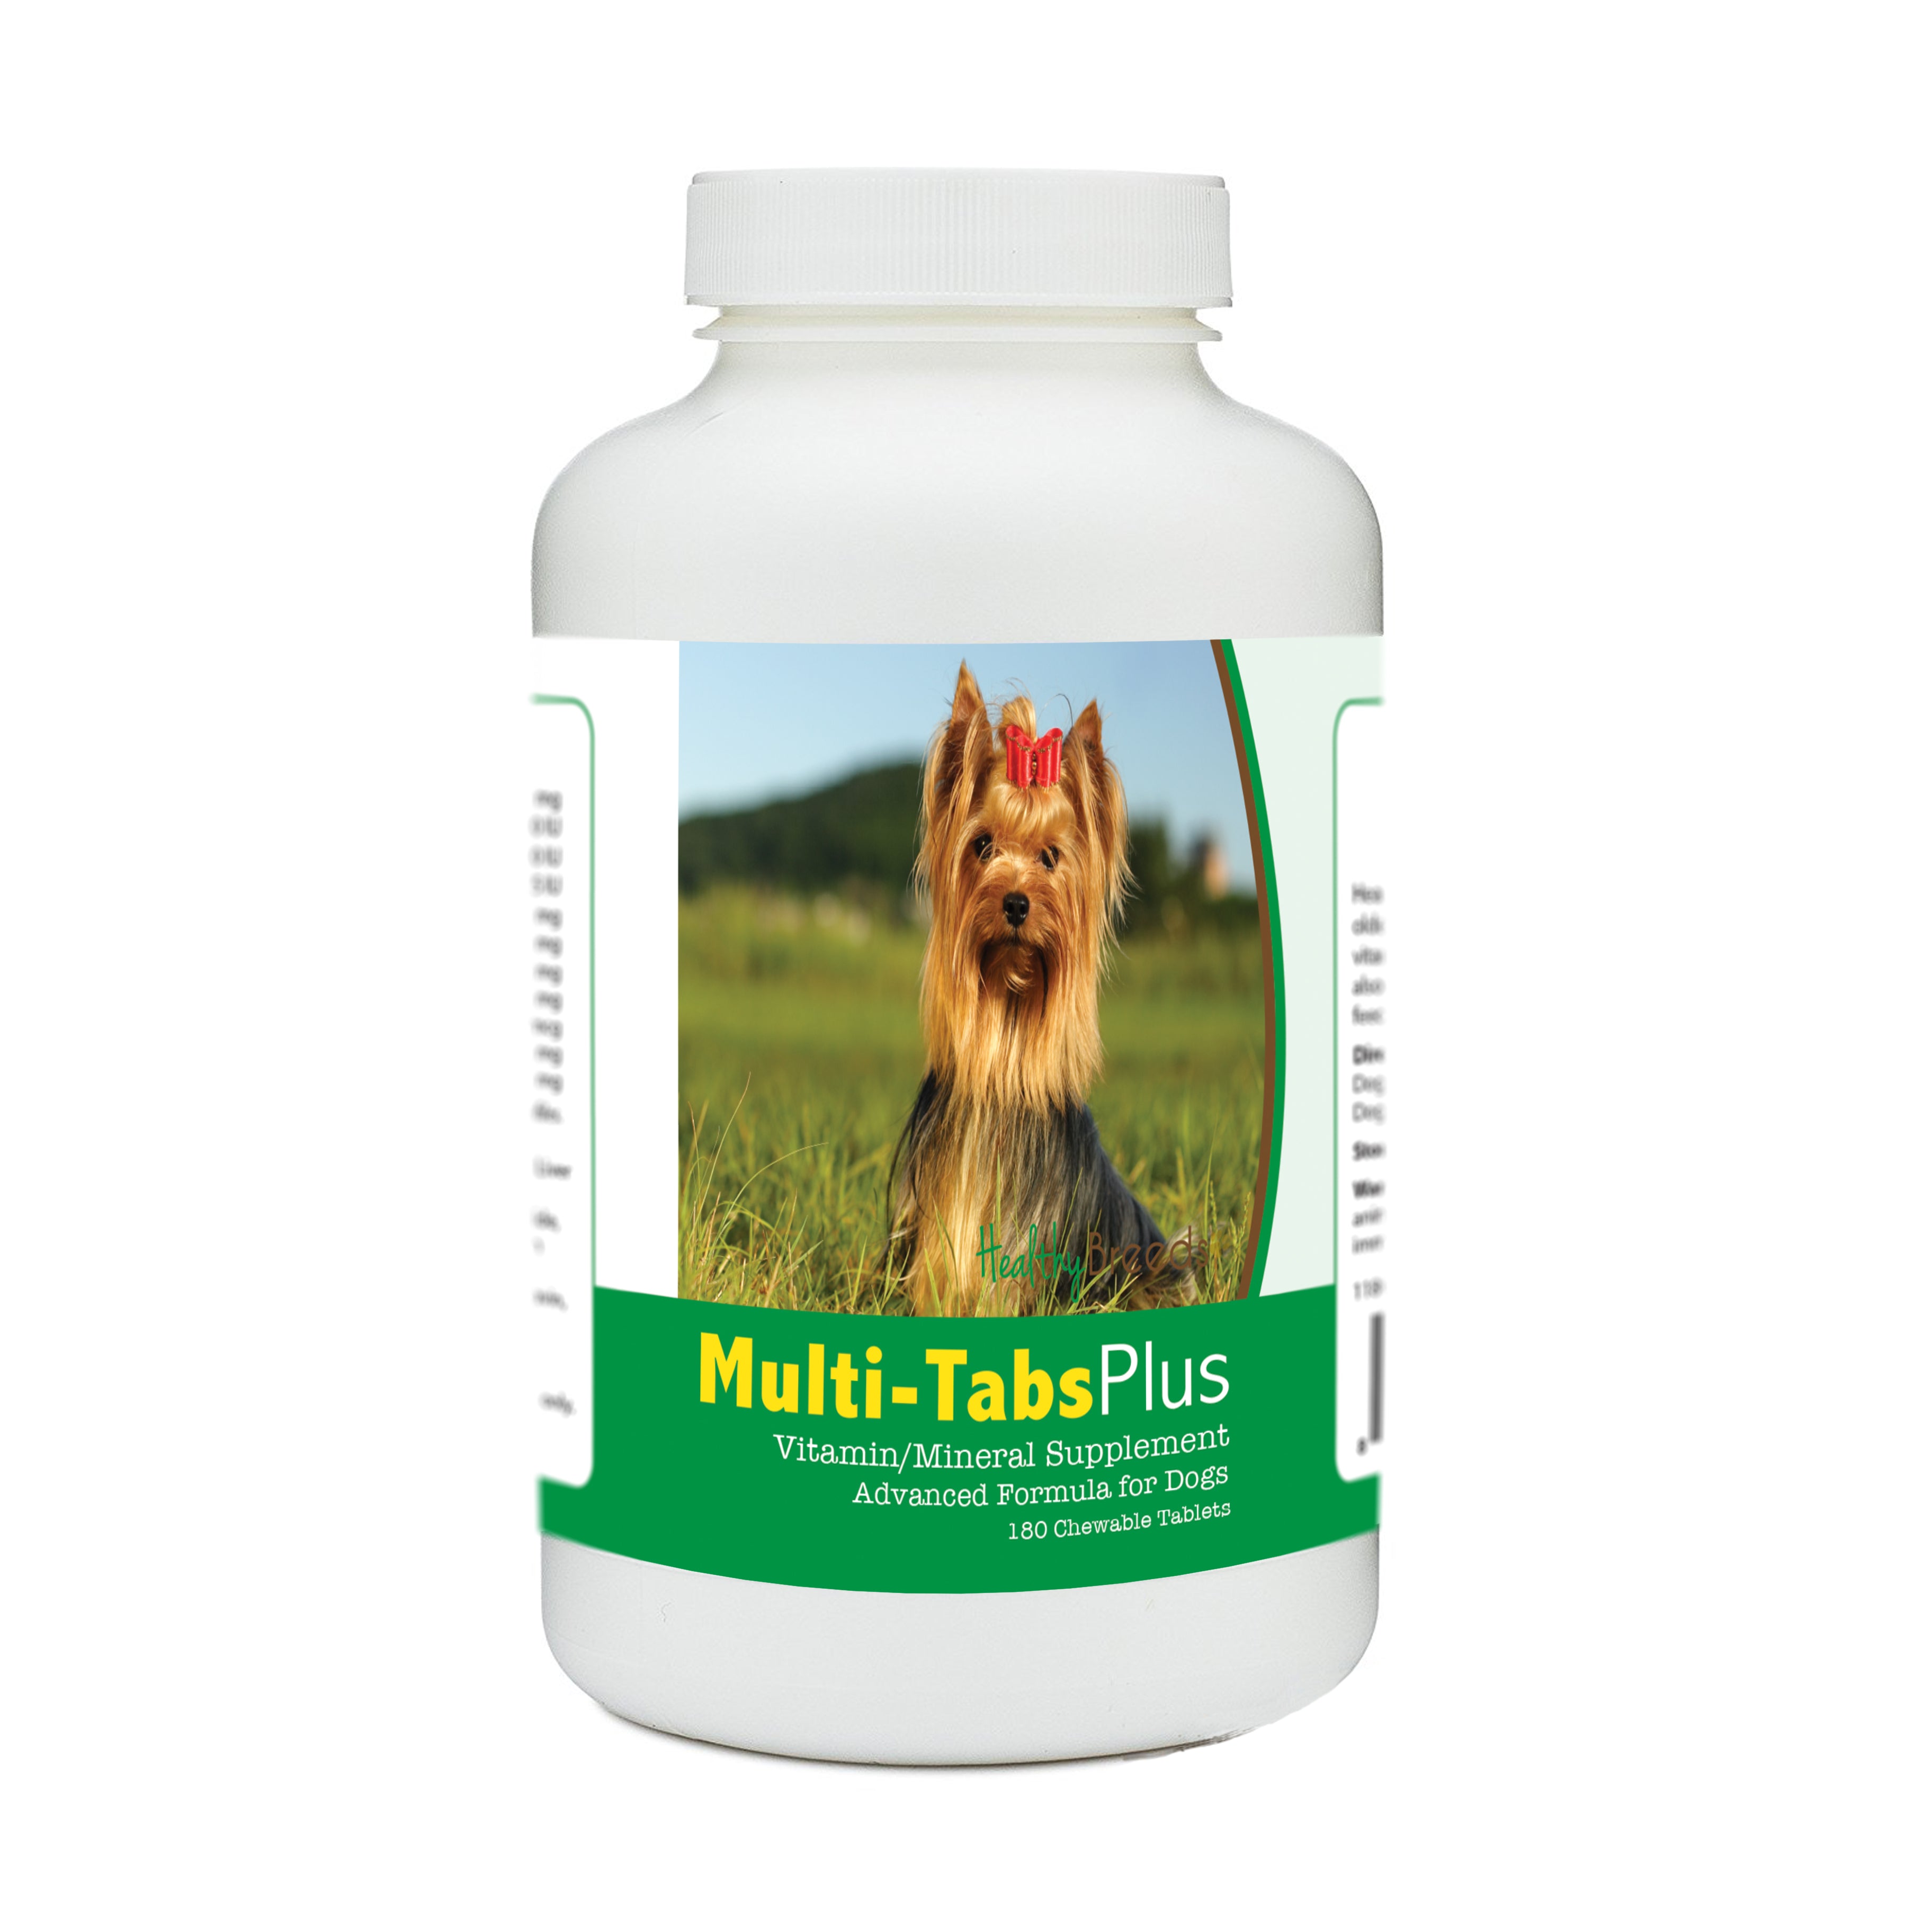 Yorkshire Terrier Multi-Tabs Plus Chewable Tablets 180 Count